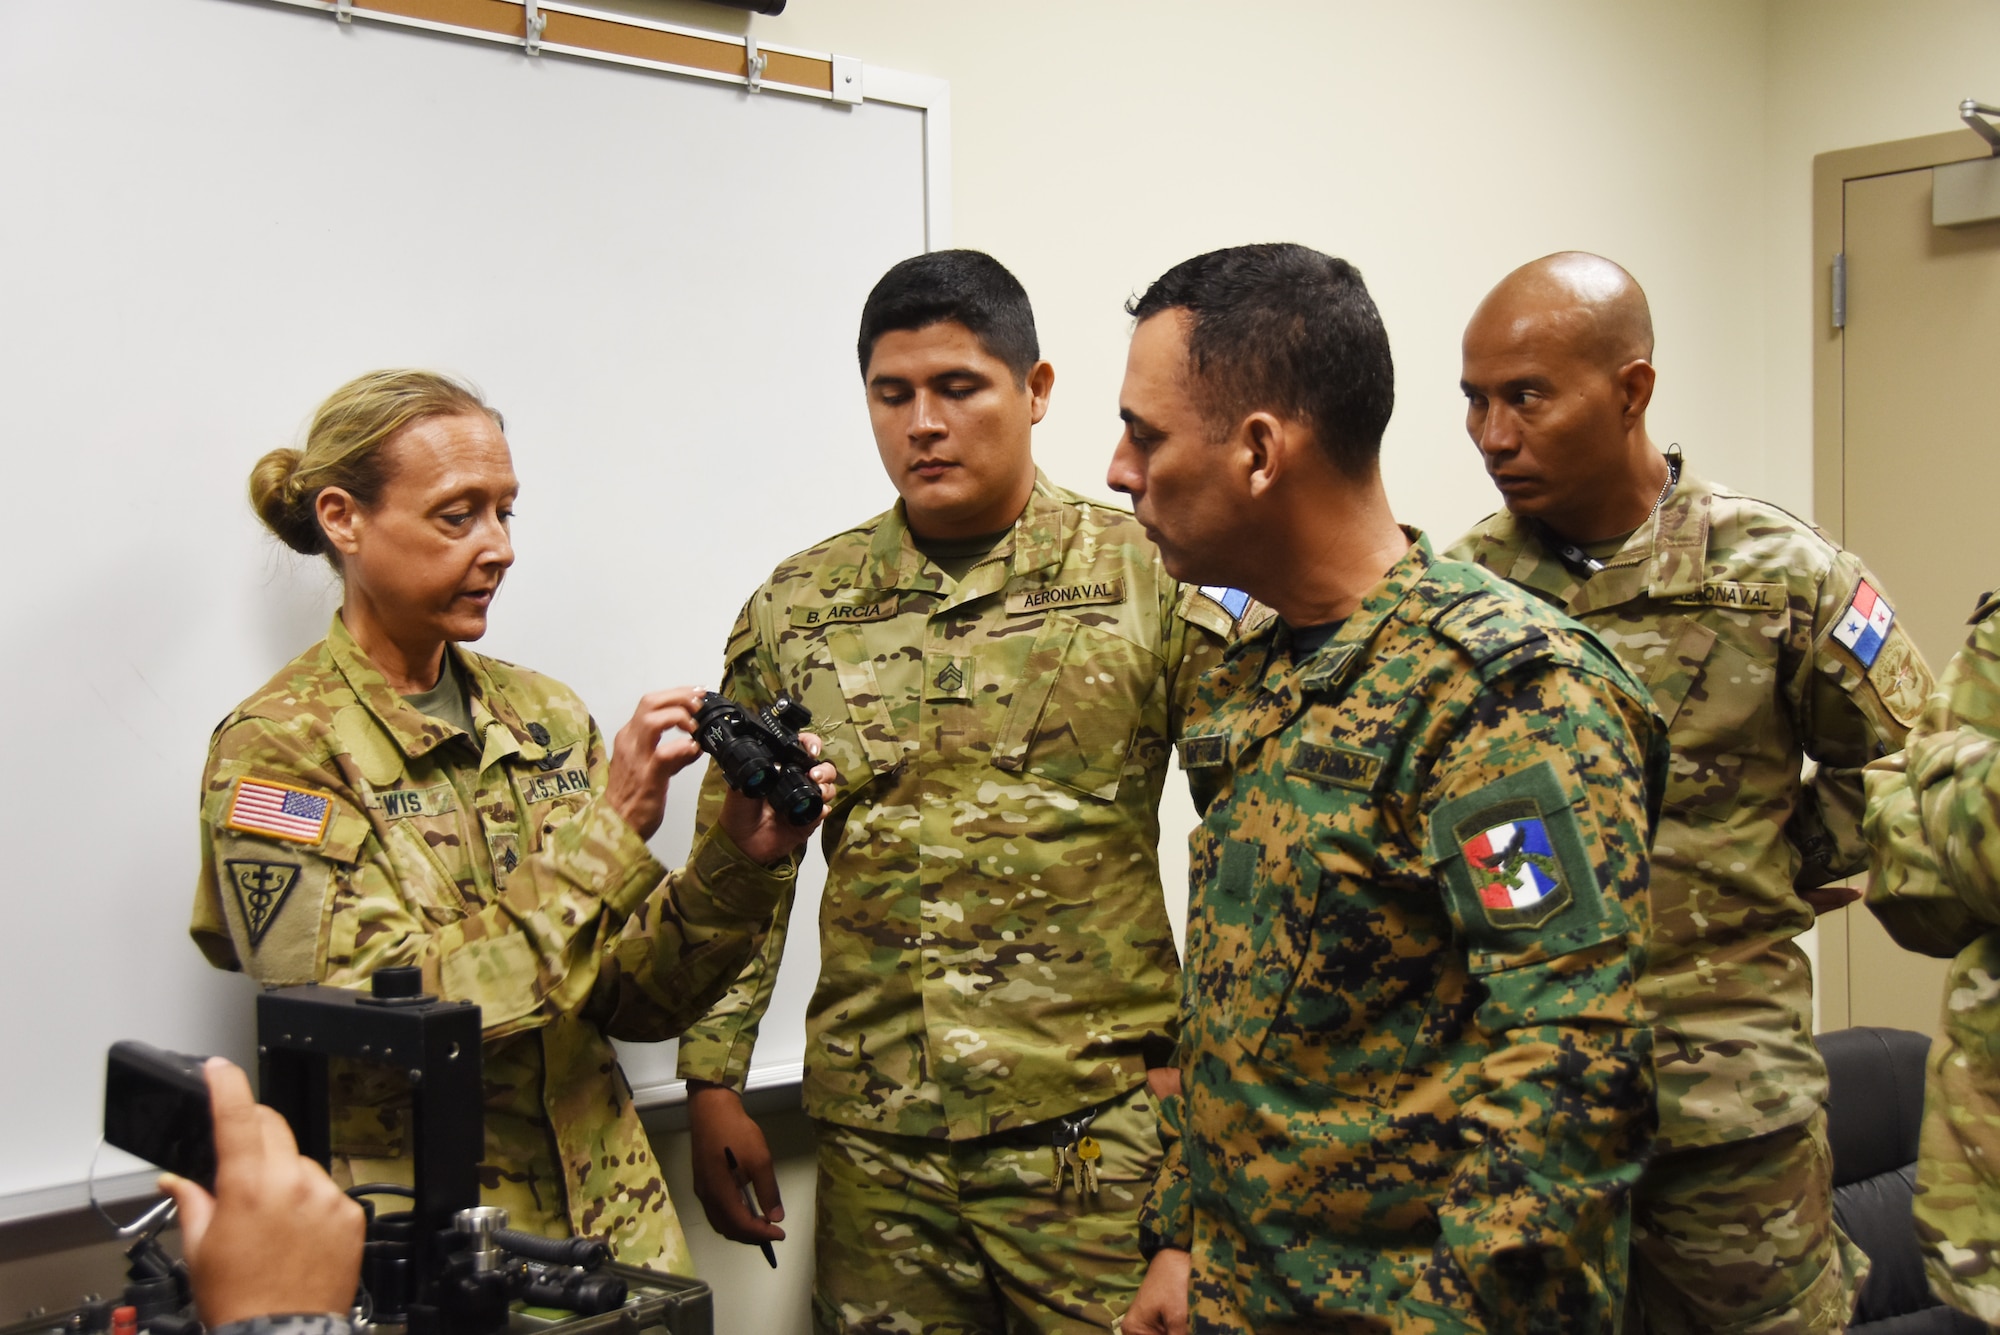 U.S. Army Staff Sgt. Michelle Lewis, an aviation life support equipment (ALSE) NCO technician assigned to the 1-135th Attack Reconnaissance Battalion, demonstrates proper maintenance procedures for Night Vision Goggles (NVGs) to members of the Panamanian Public Forces at Whiteman Air Force Base, Mo., March 16, 2016. The visit, part of the ongoing State Partnership Program between the Missouri National Guard and the Panamanian Public Forces, enabled subject matter exchanges between the two partners.
(U.S. Air National Guard photo by Senior Master Sgt. Mary-Dale Amison)
